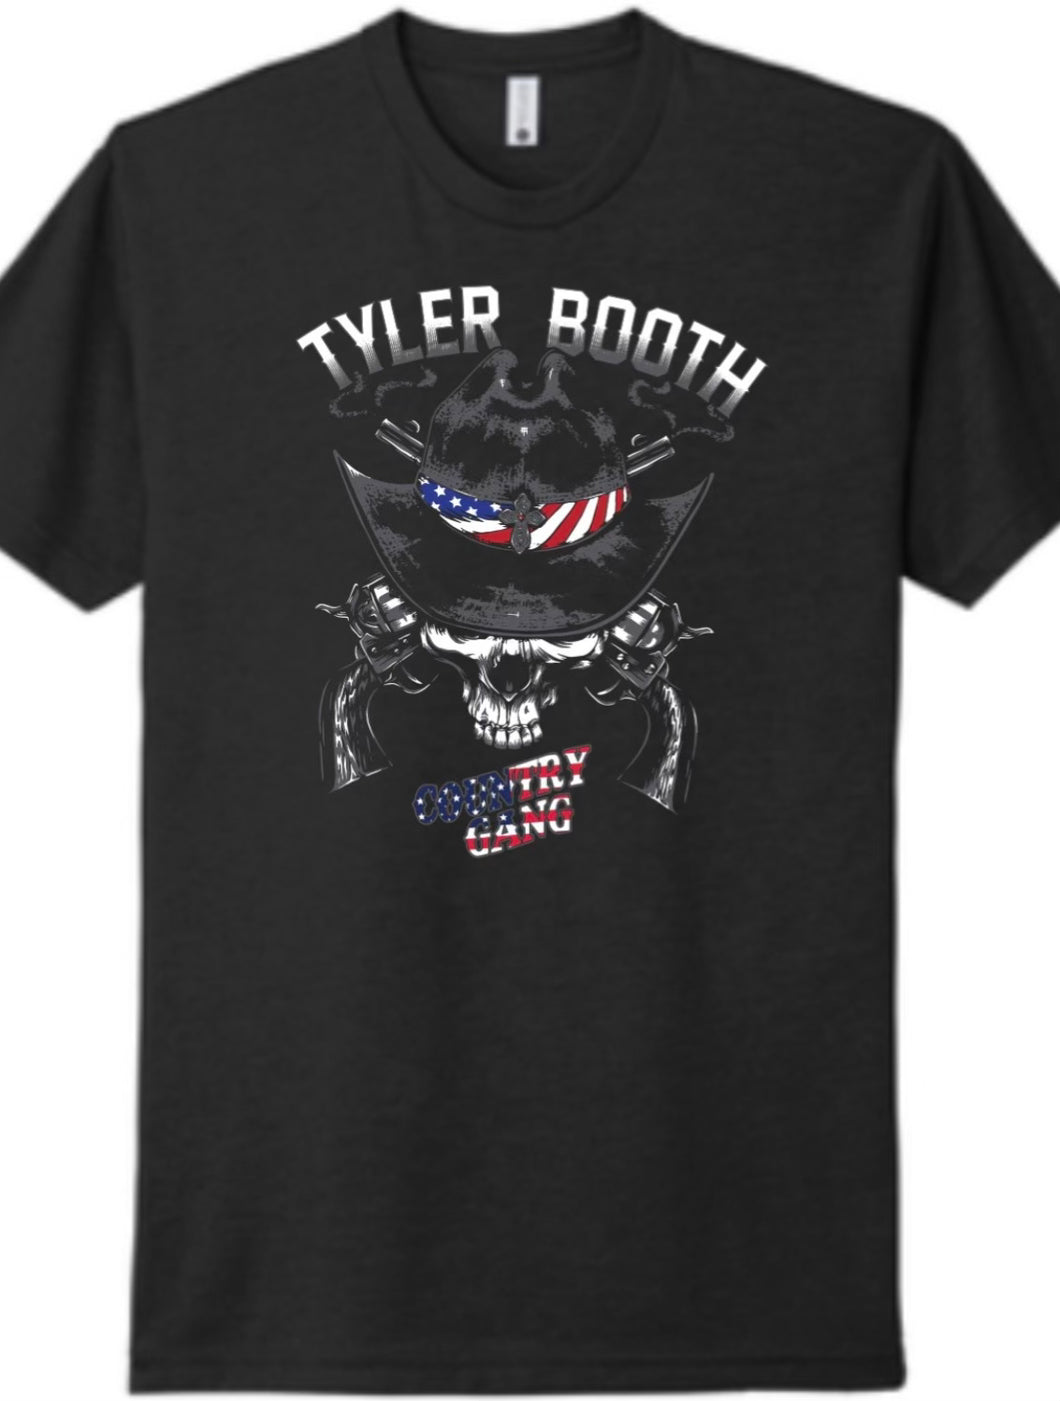 Tyler Booth Outlaw Country Gang T-Shirt